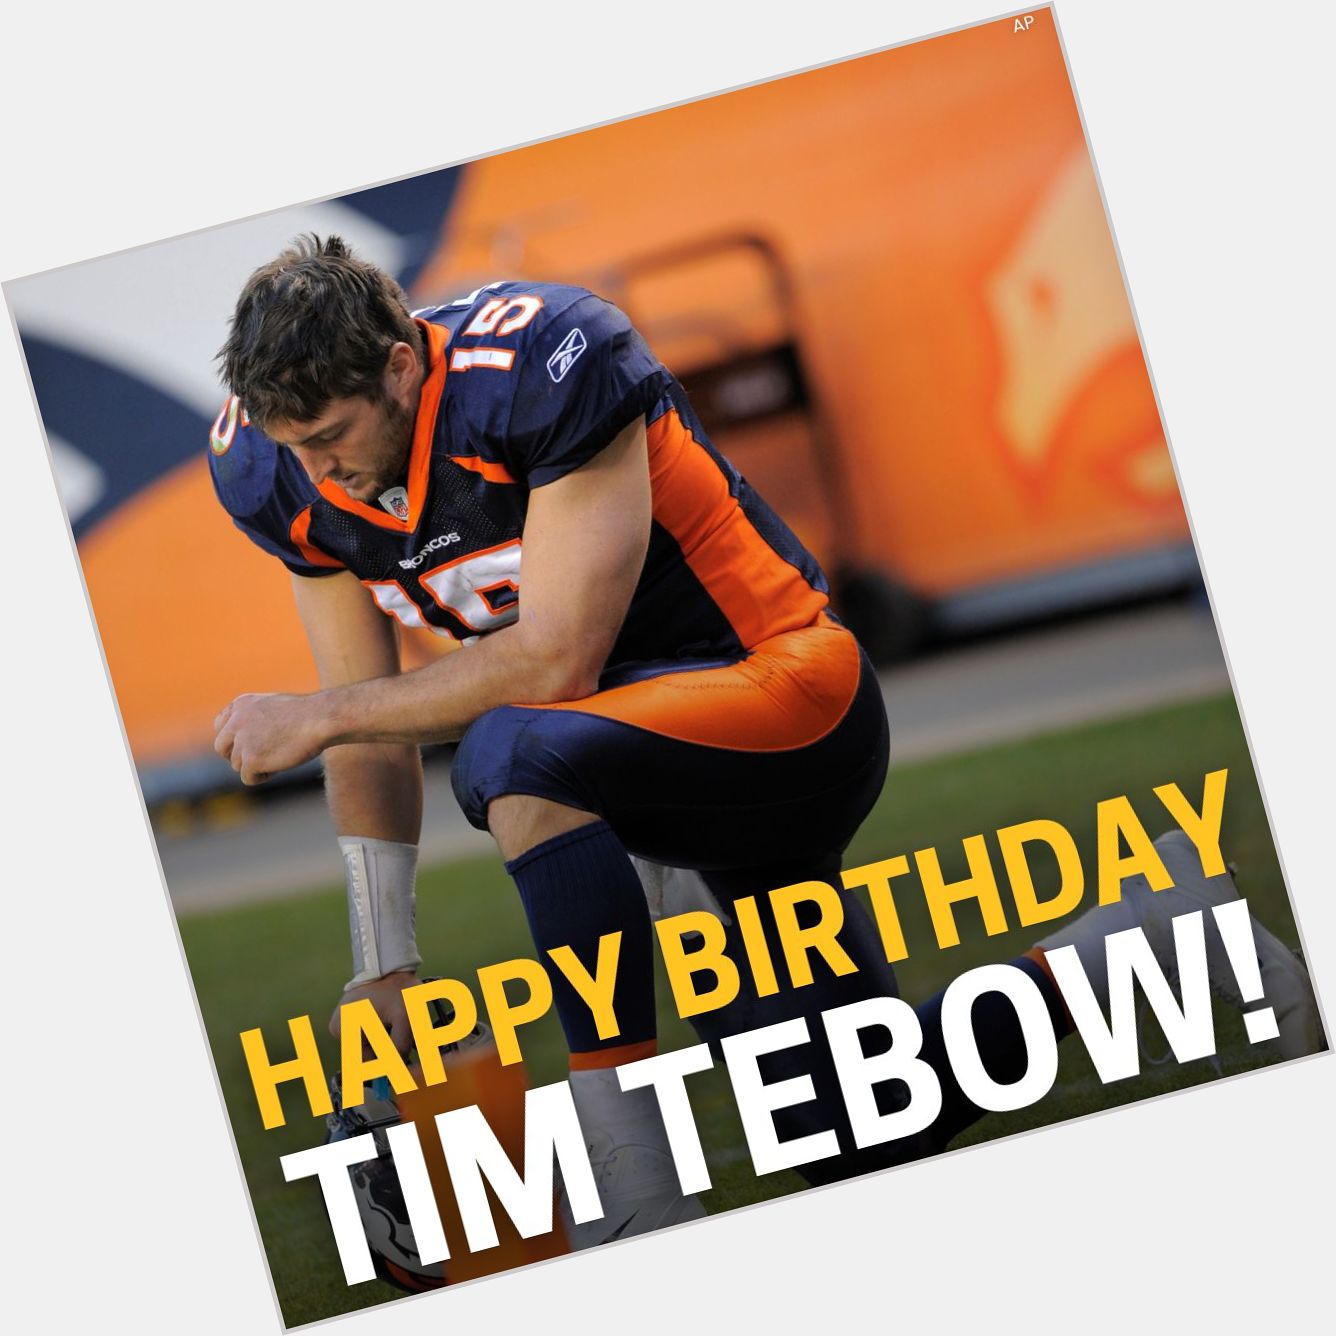 A Happy Birthday to two-time national champion, Tim Tebow! 